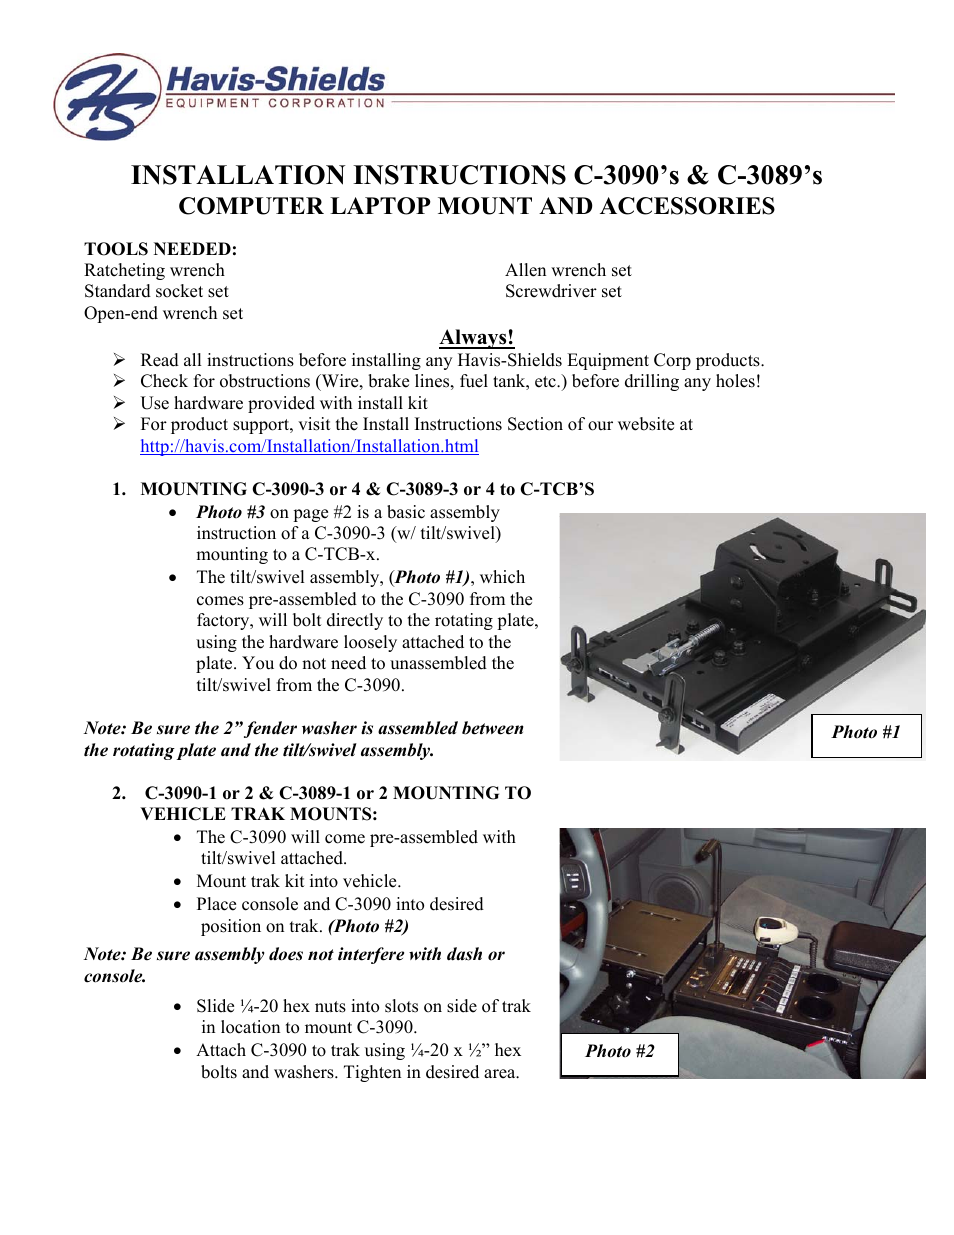 Computer Laptop Mount and Accessories C-3089's